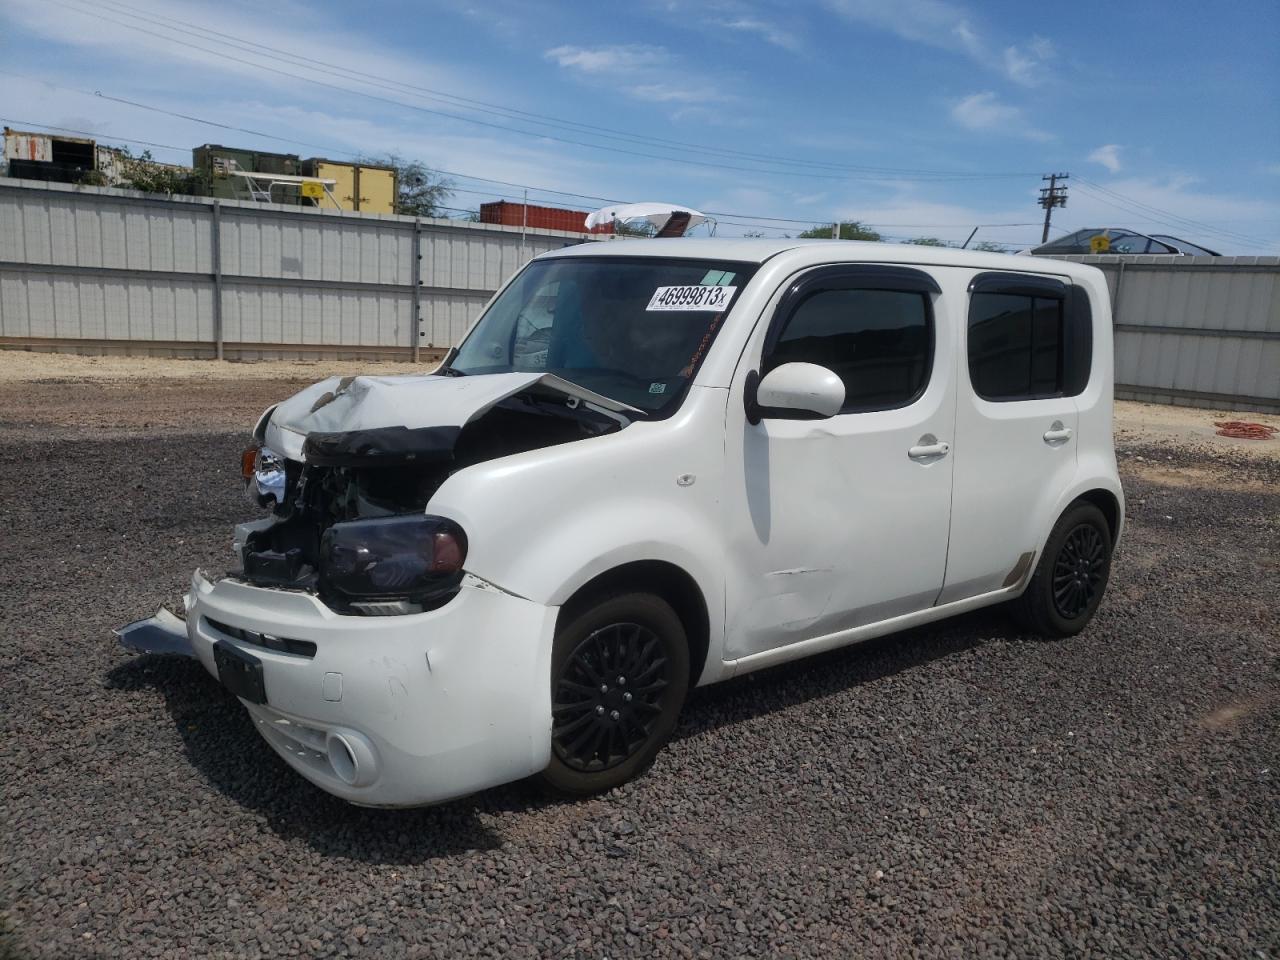 2014 Nissan Cube S for sale at Copart Kapolei, HI Lot #46999*** |  SalvageReseller.com